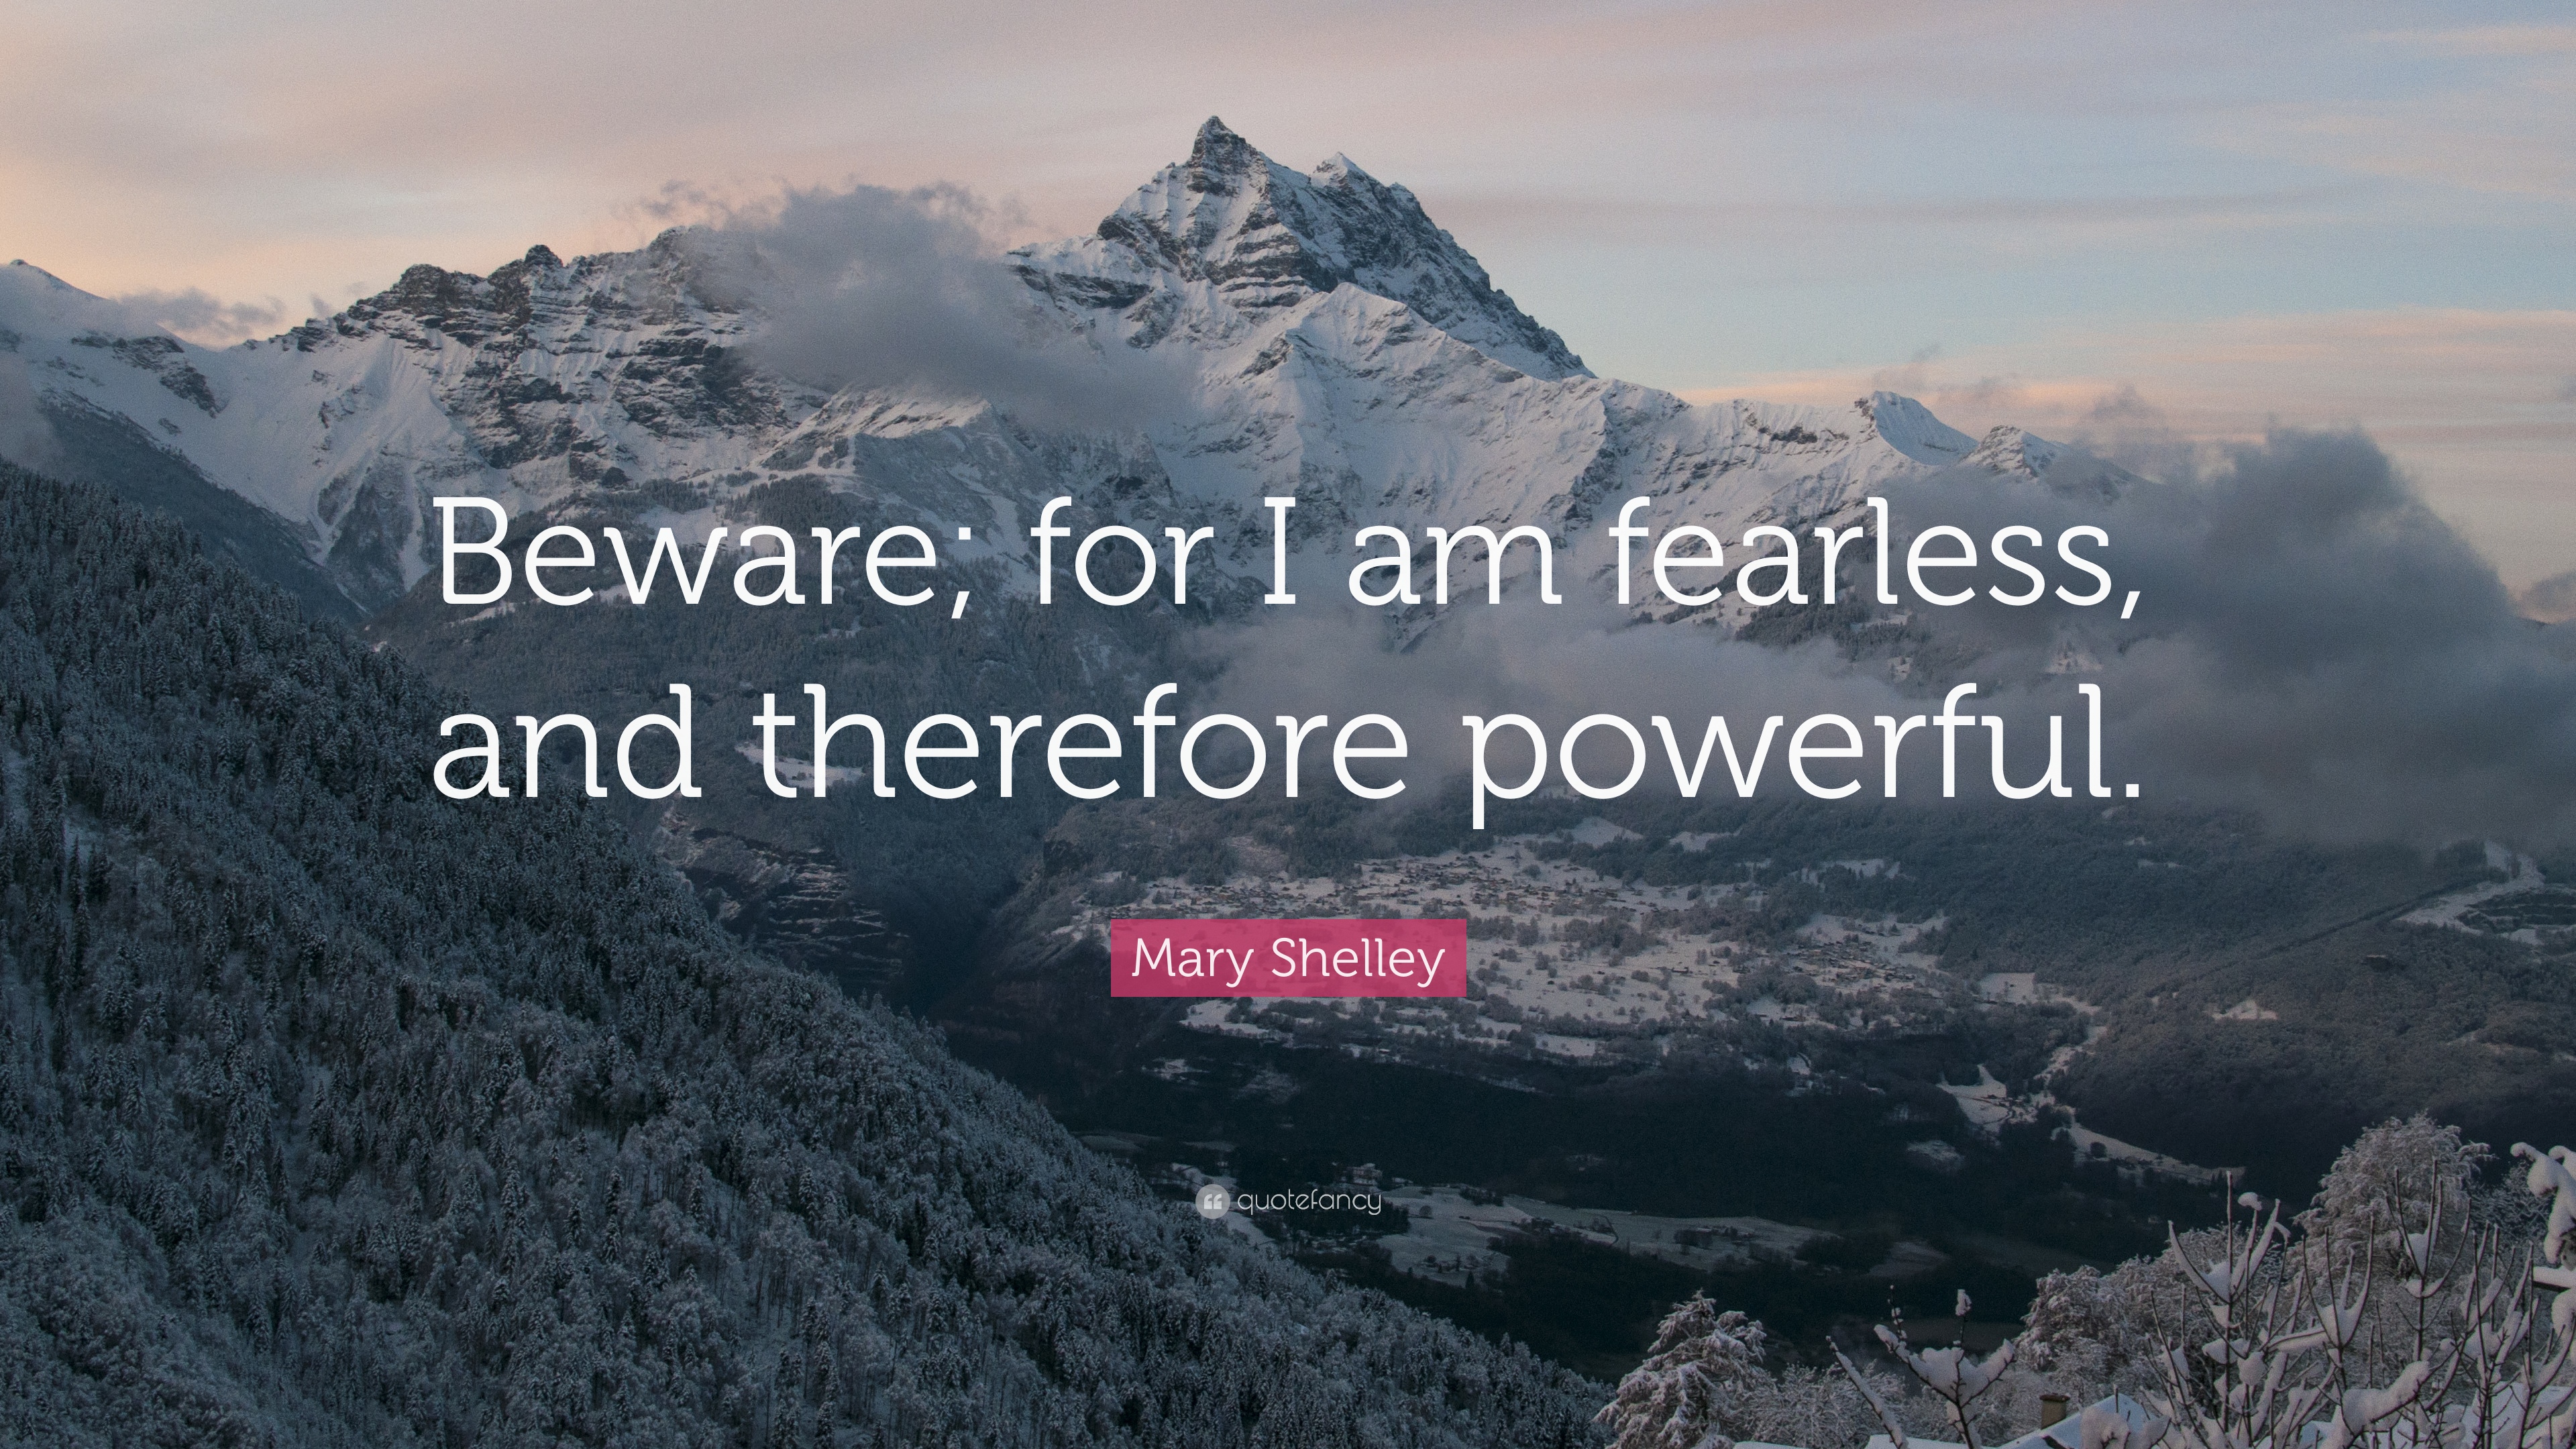 Mary Shelley Quote Beware for I am fearless, and therefore